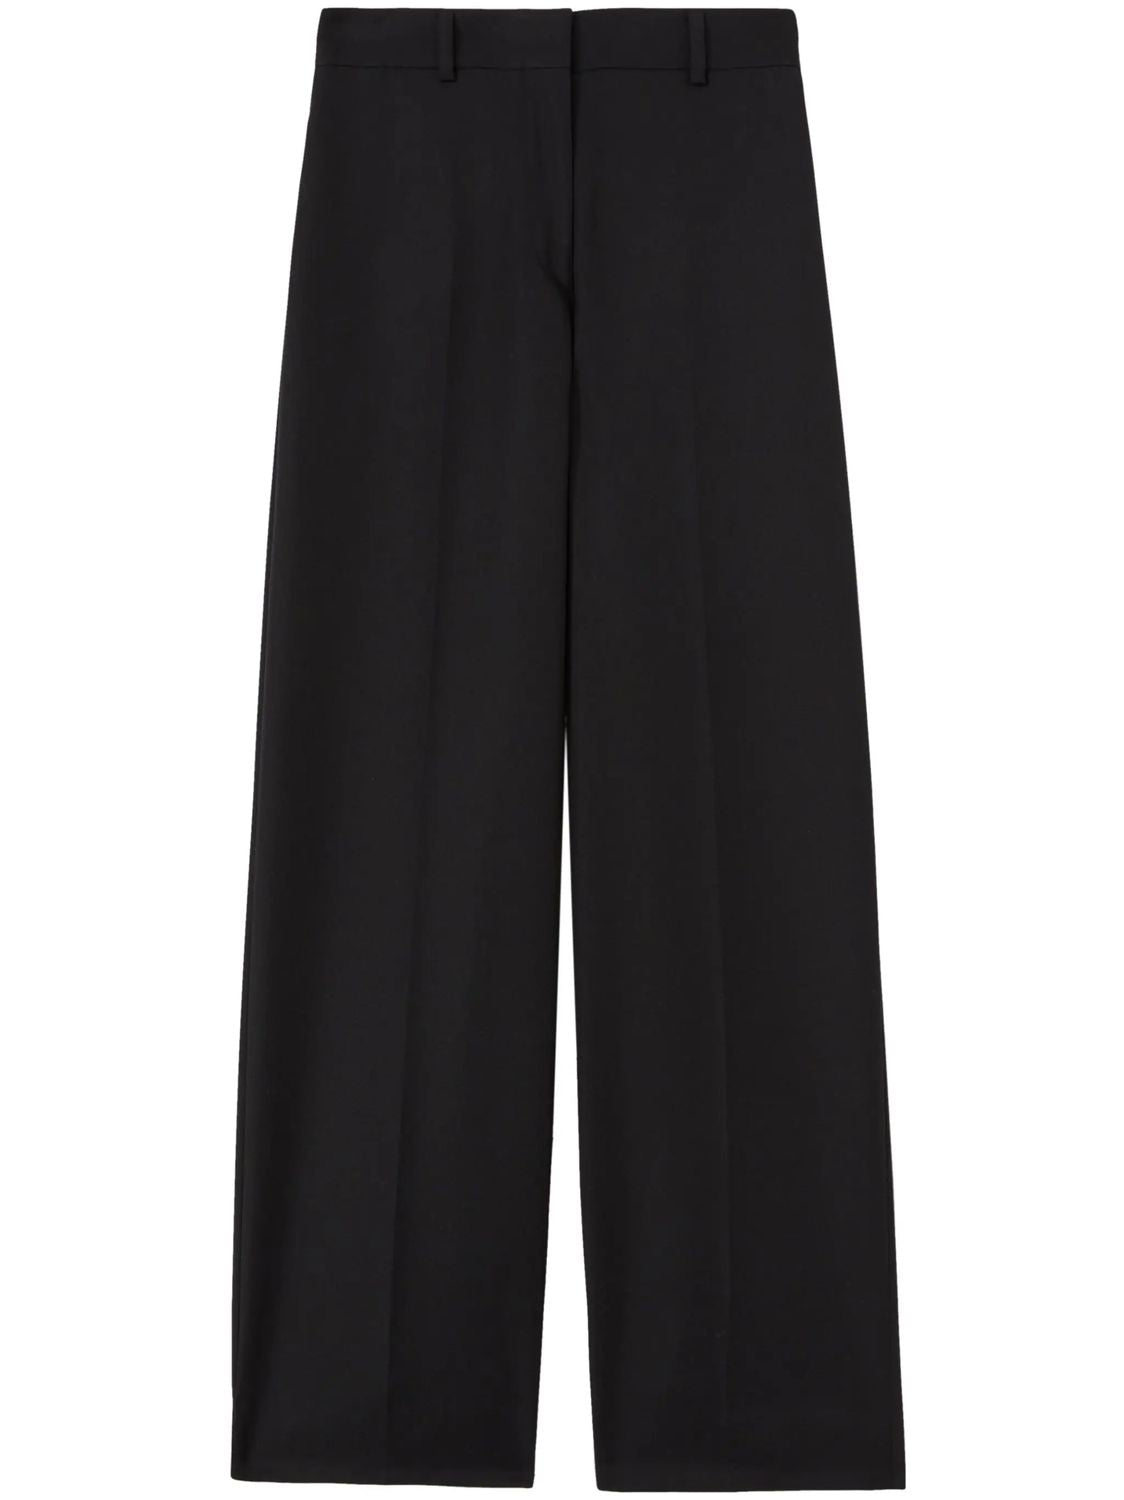 PALM ANGELS Black Wool Blend Trousers for Women